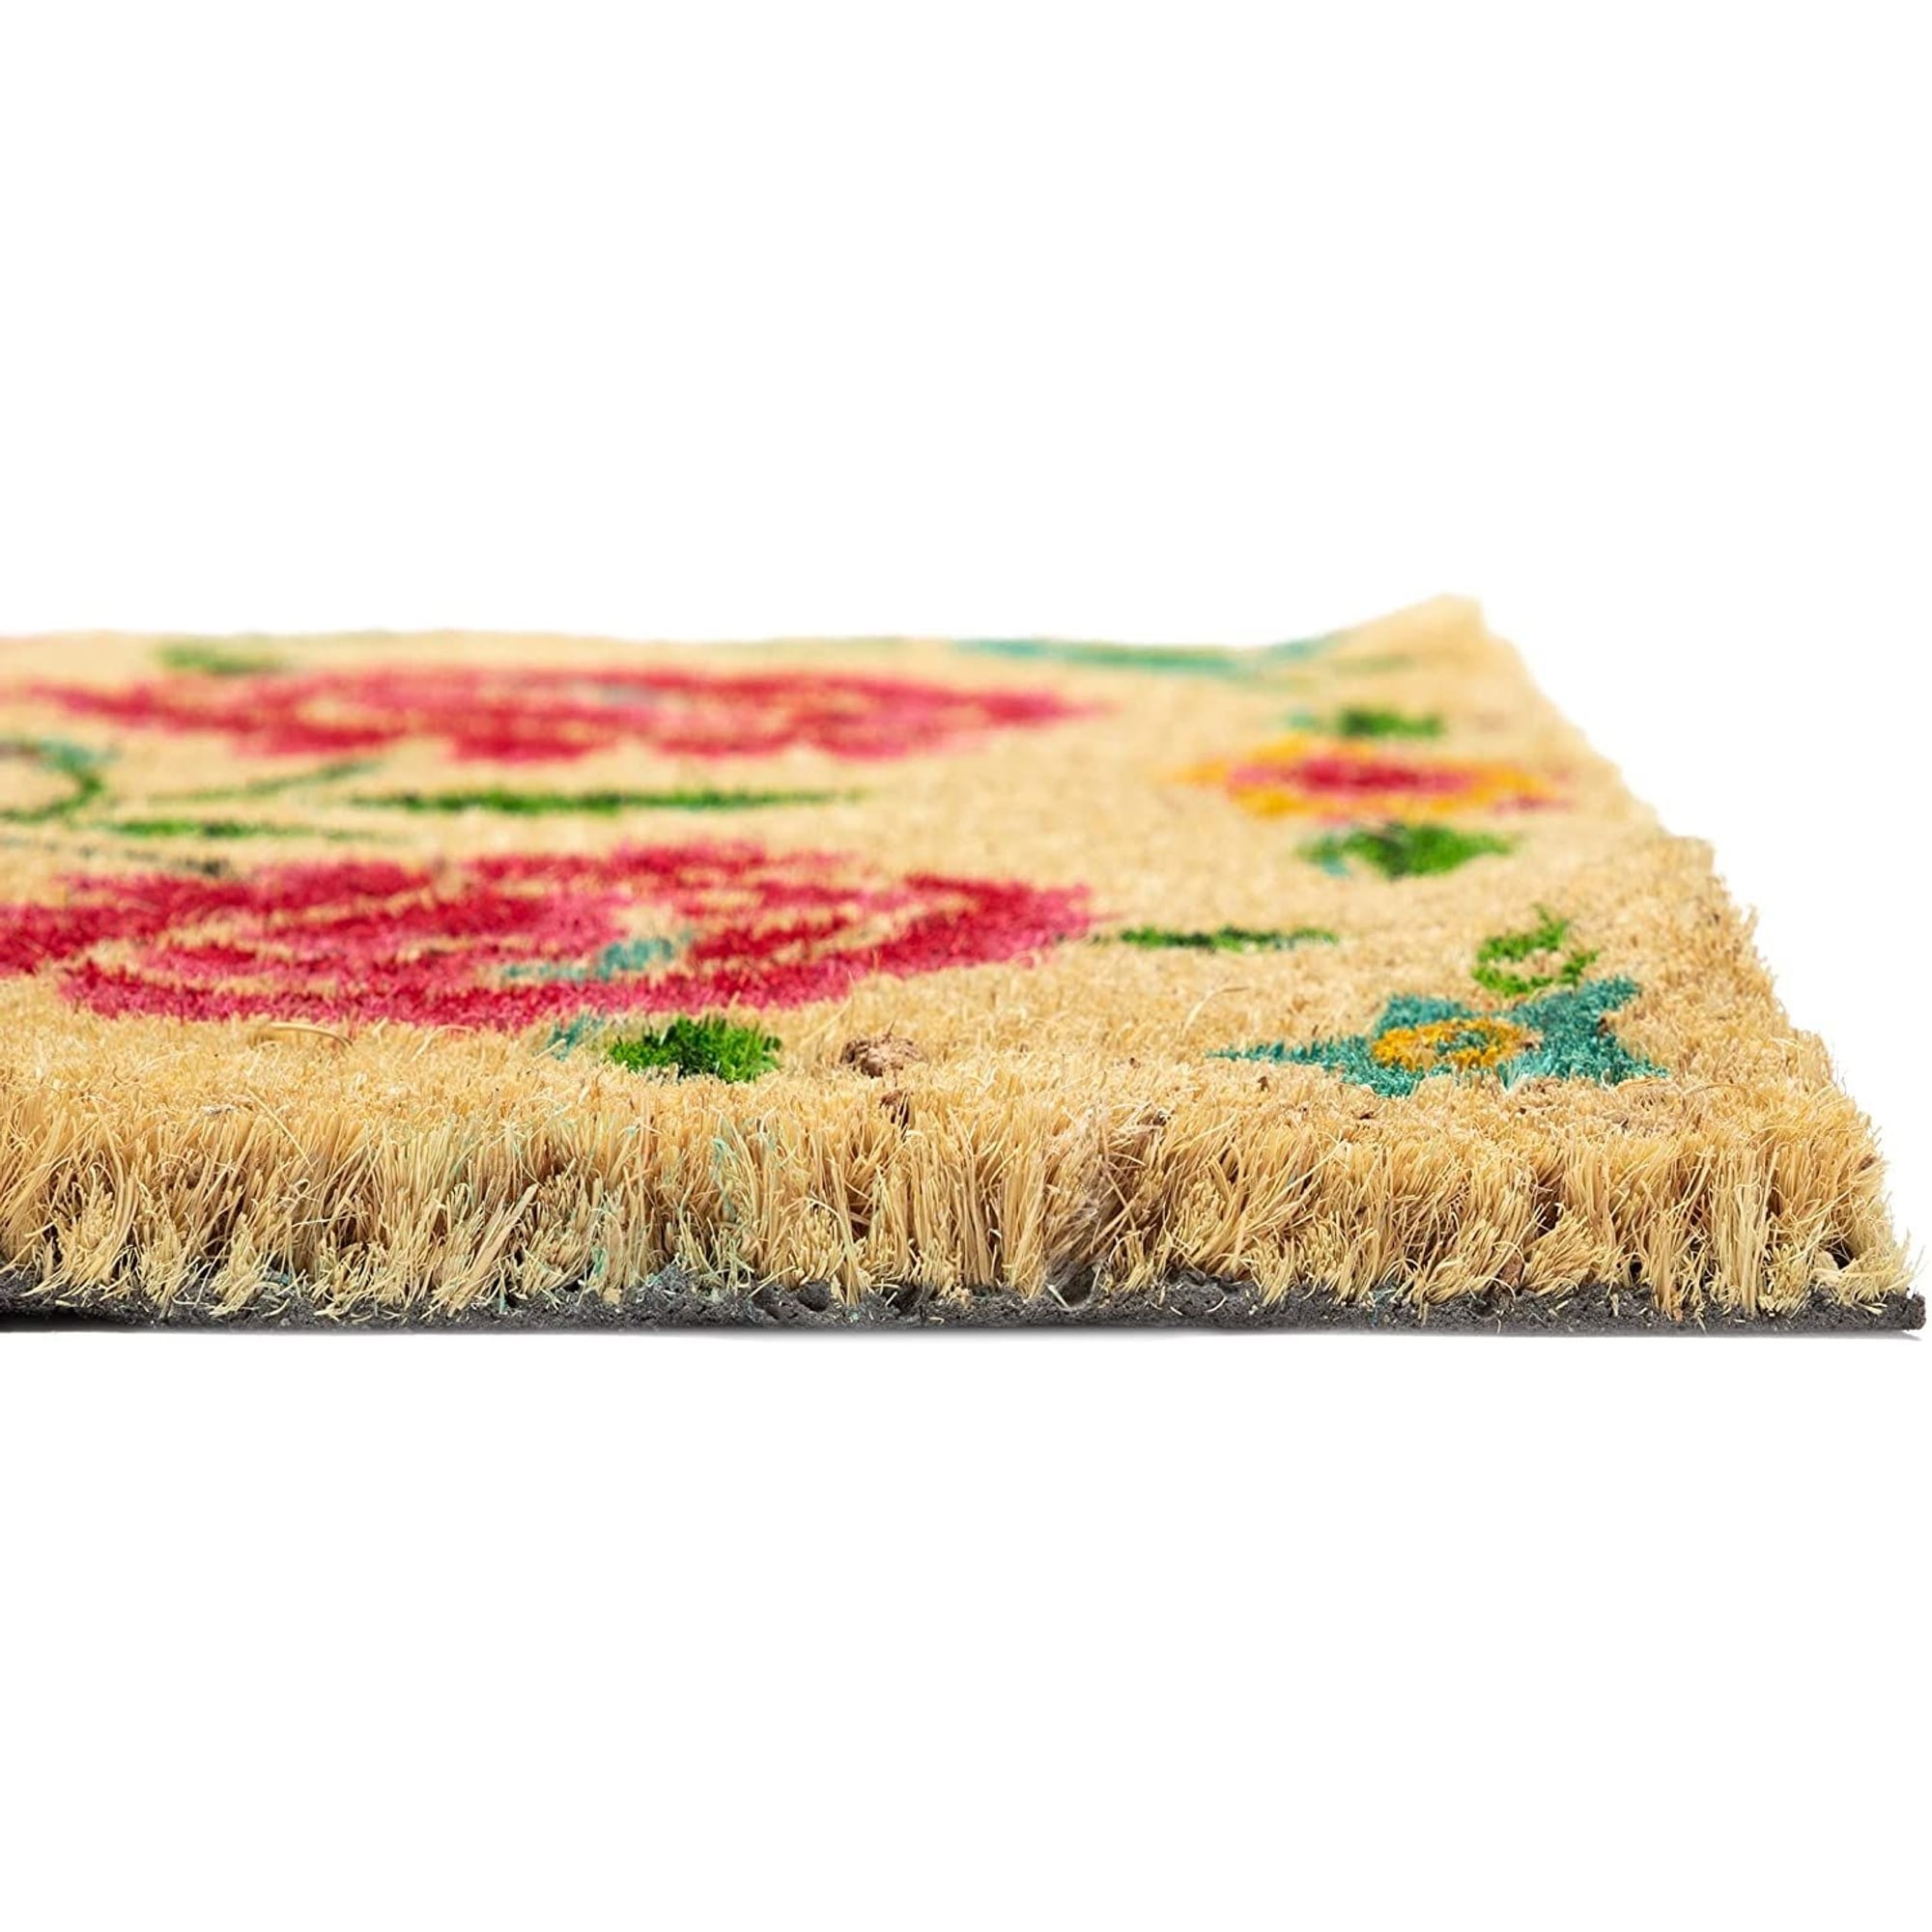 https://ak1.ostkcdn.com/images/products/is/images/direct/a7a86fc65b59020a325f6c561a15b6e566464435/Natural-Coir-Doormat%2C-Flower-Welcome-Mat-%2830-x-17-In%29.jpg